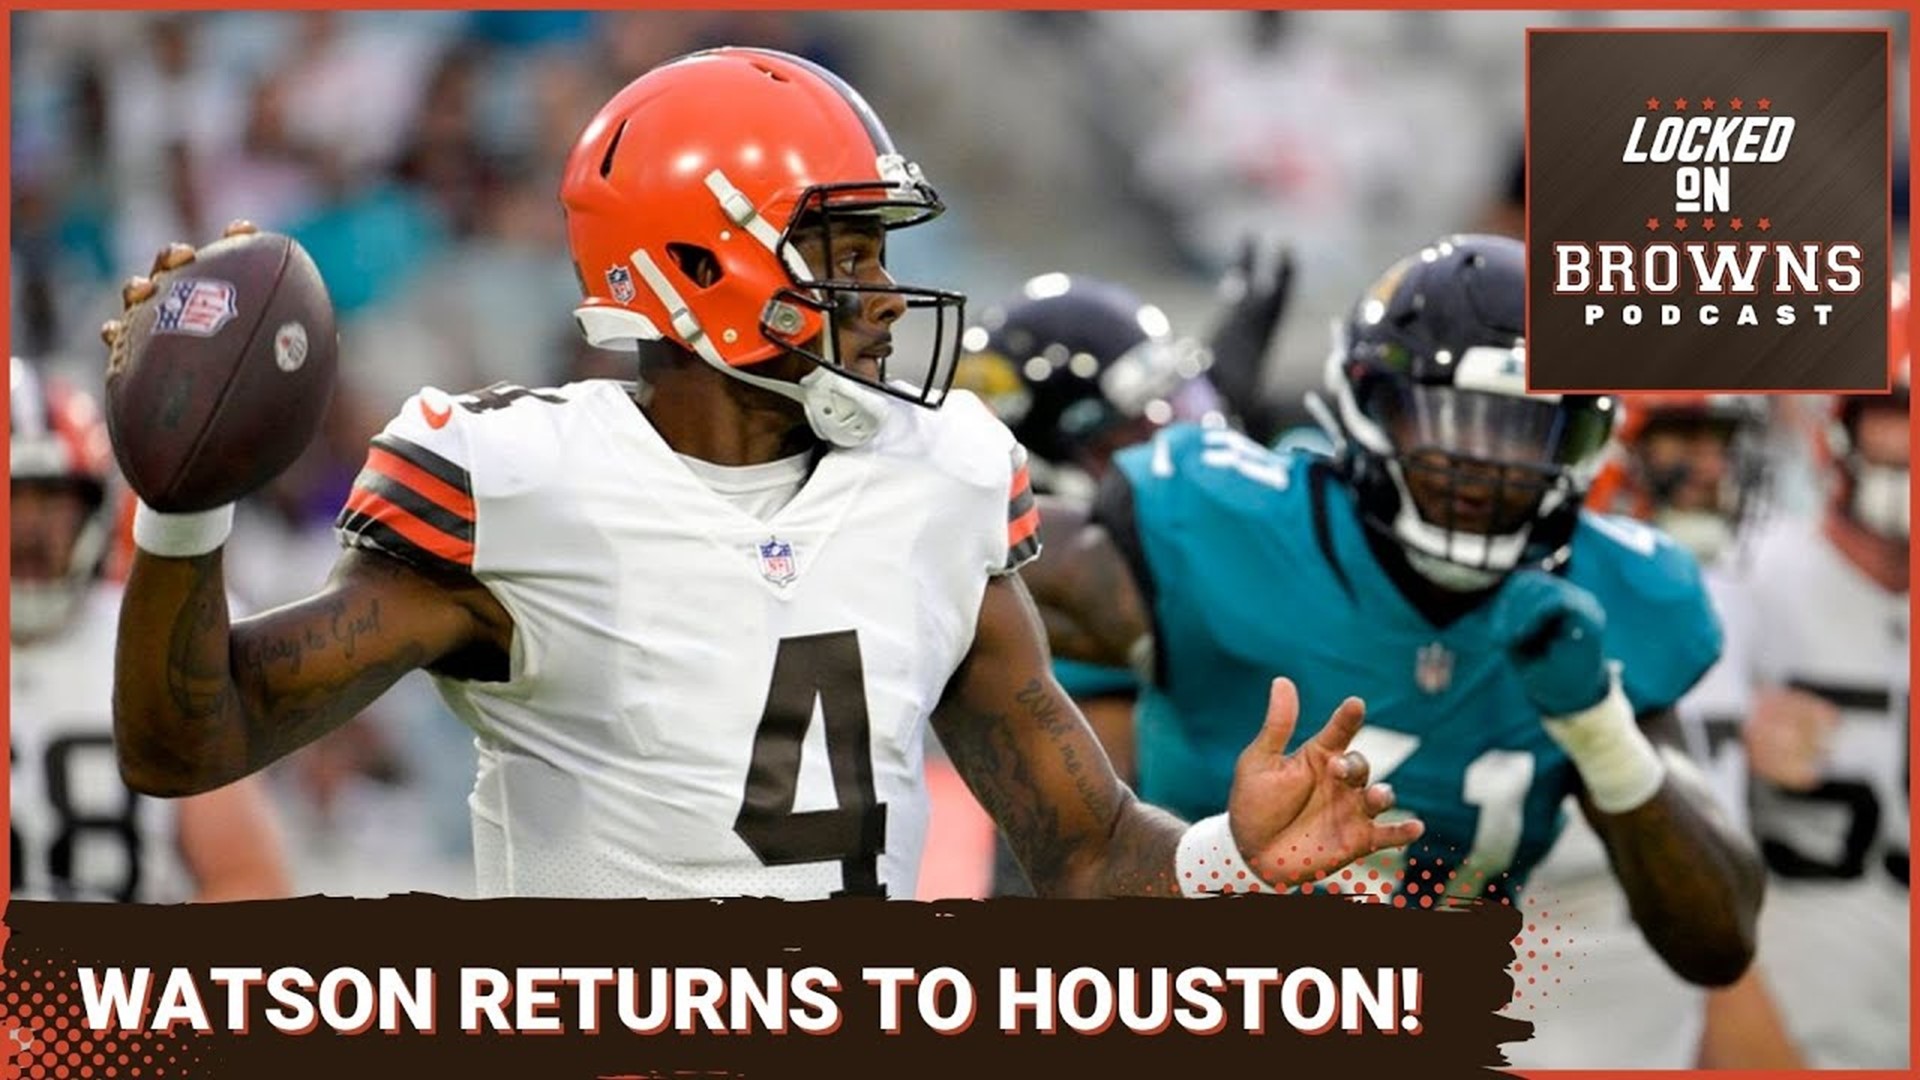 Browns vs. Texans preview as Deshaun Watson returns to Houston in first  game since suspension: Locked On Browns